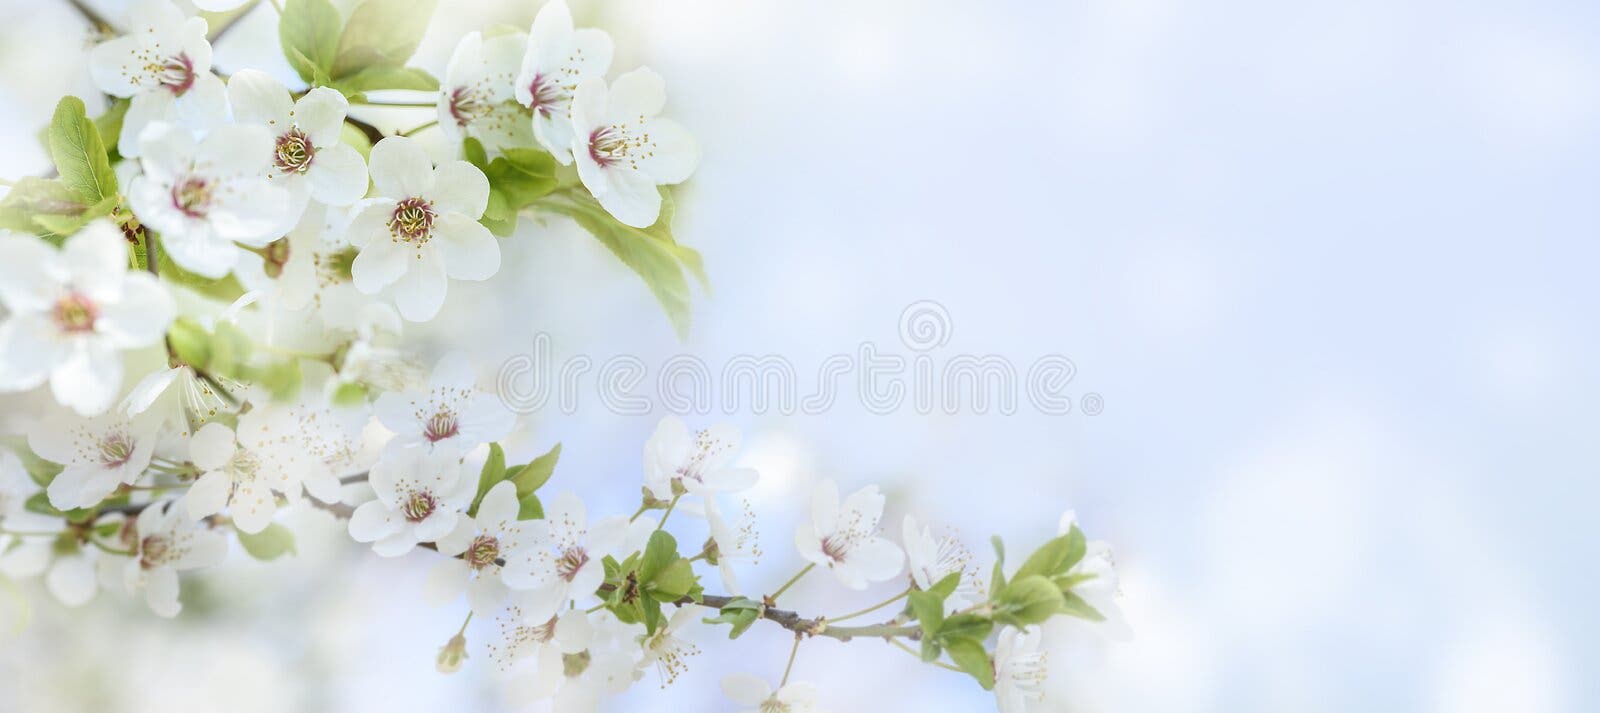 Spring background Stock Photos, Royalty Free Spring background Images